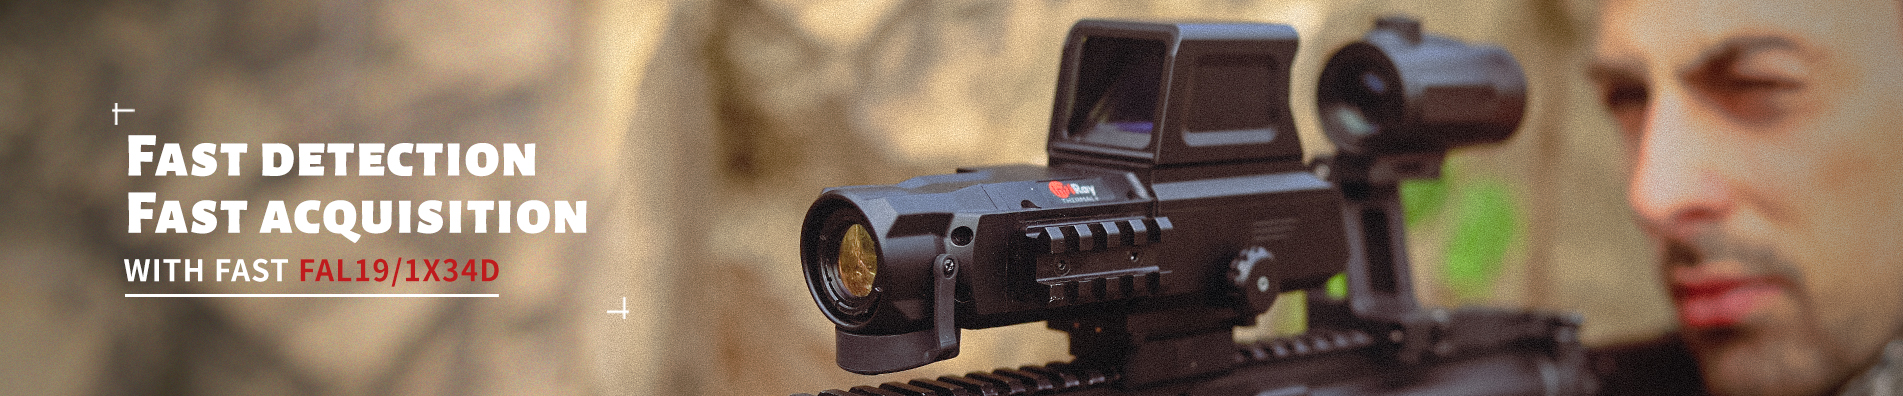 Red-Dot Thermal Fusion Scope